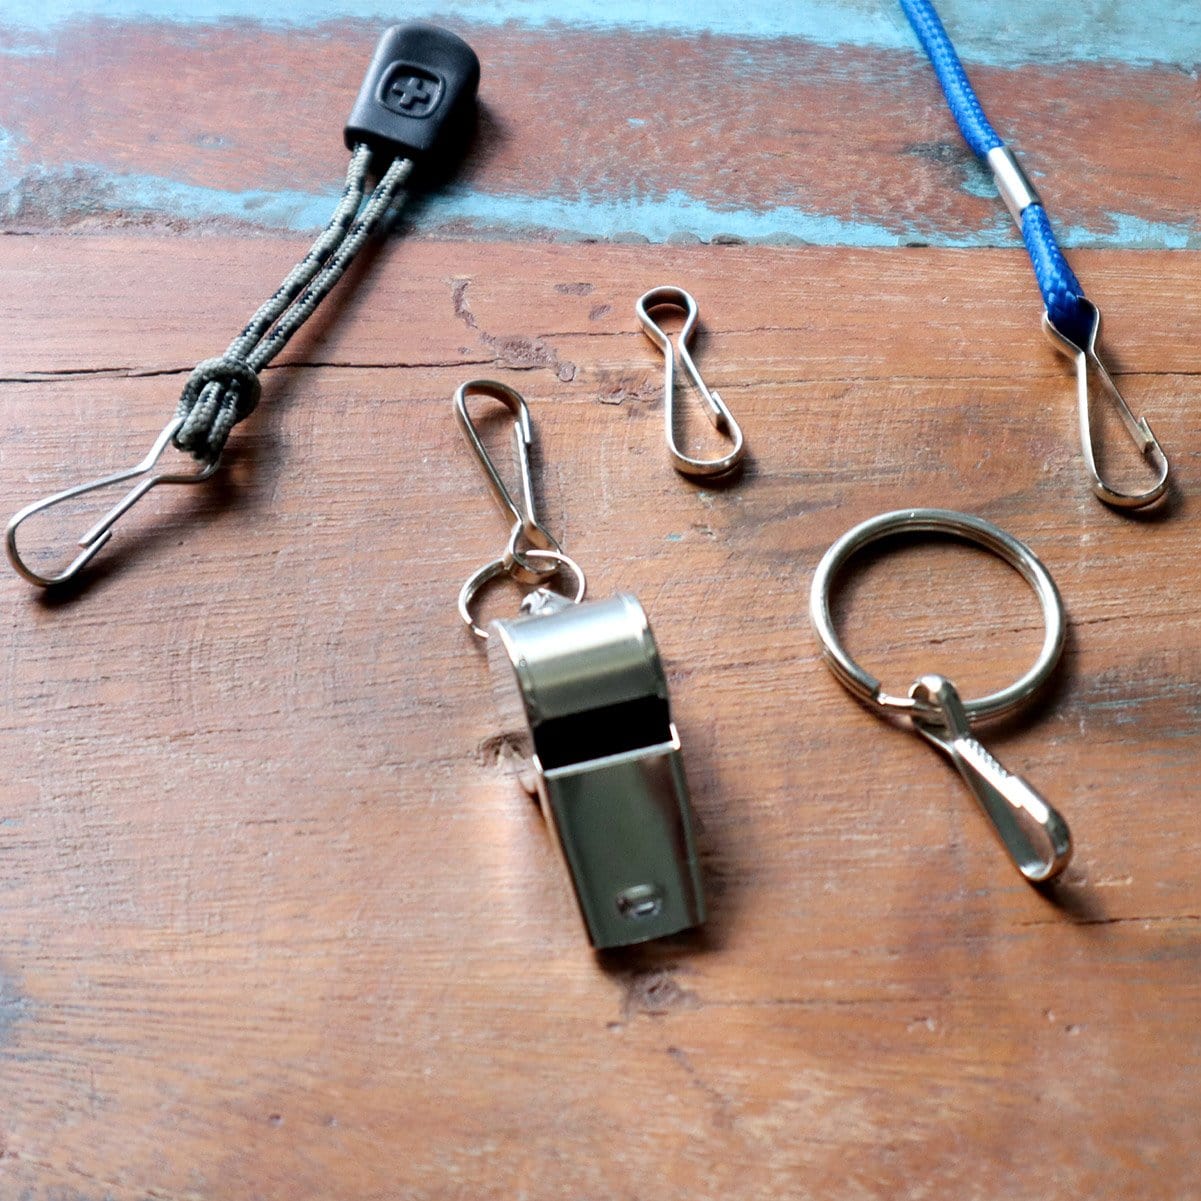 Specialist ID Small Metal J Hook Spring Clips - 1 1/4 for DIY Lanyards & Keychains (6920-2350)